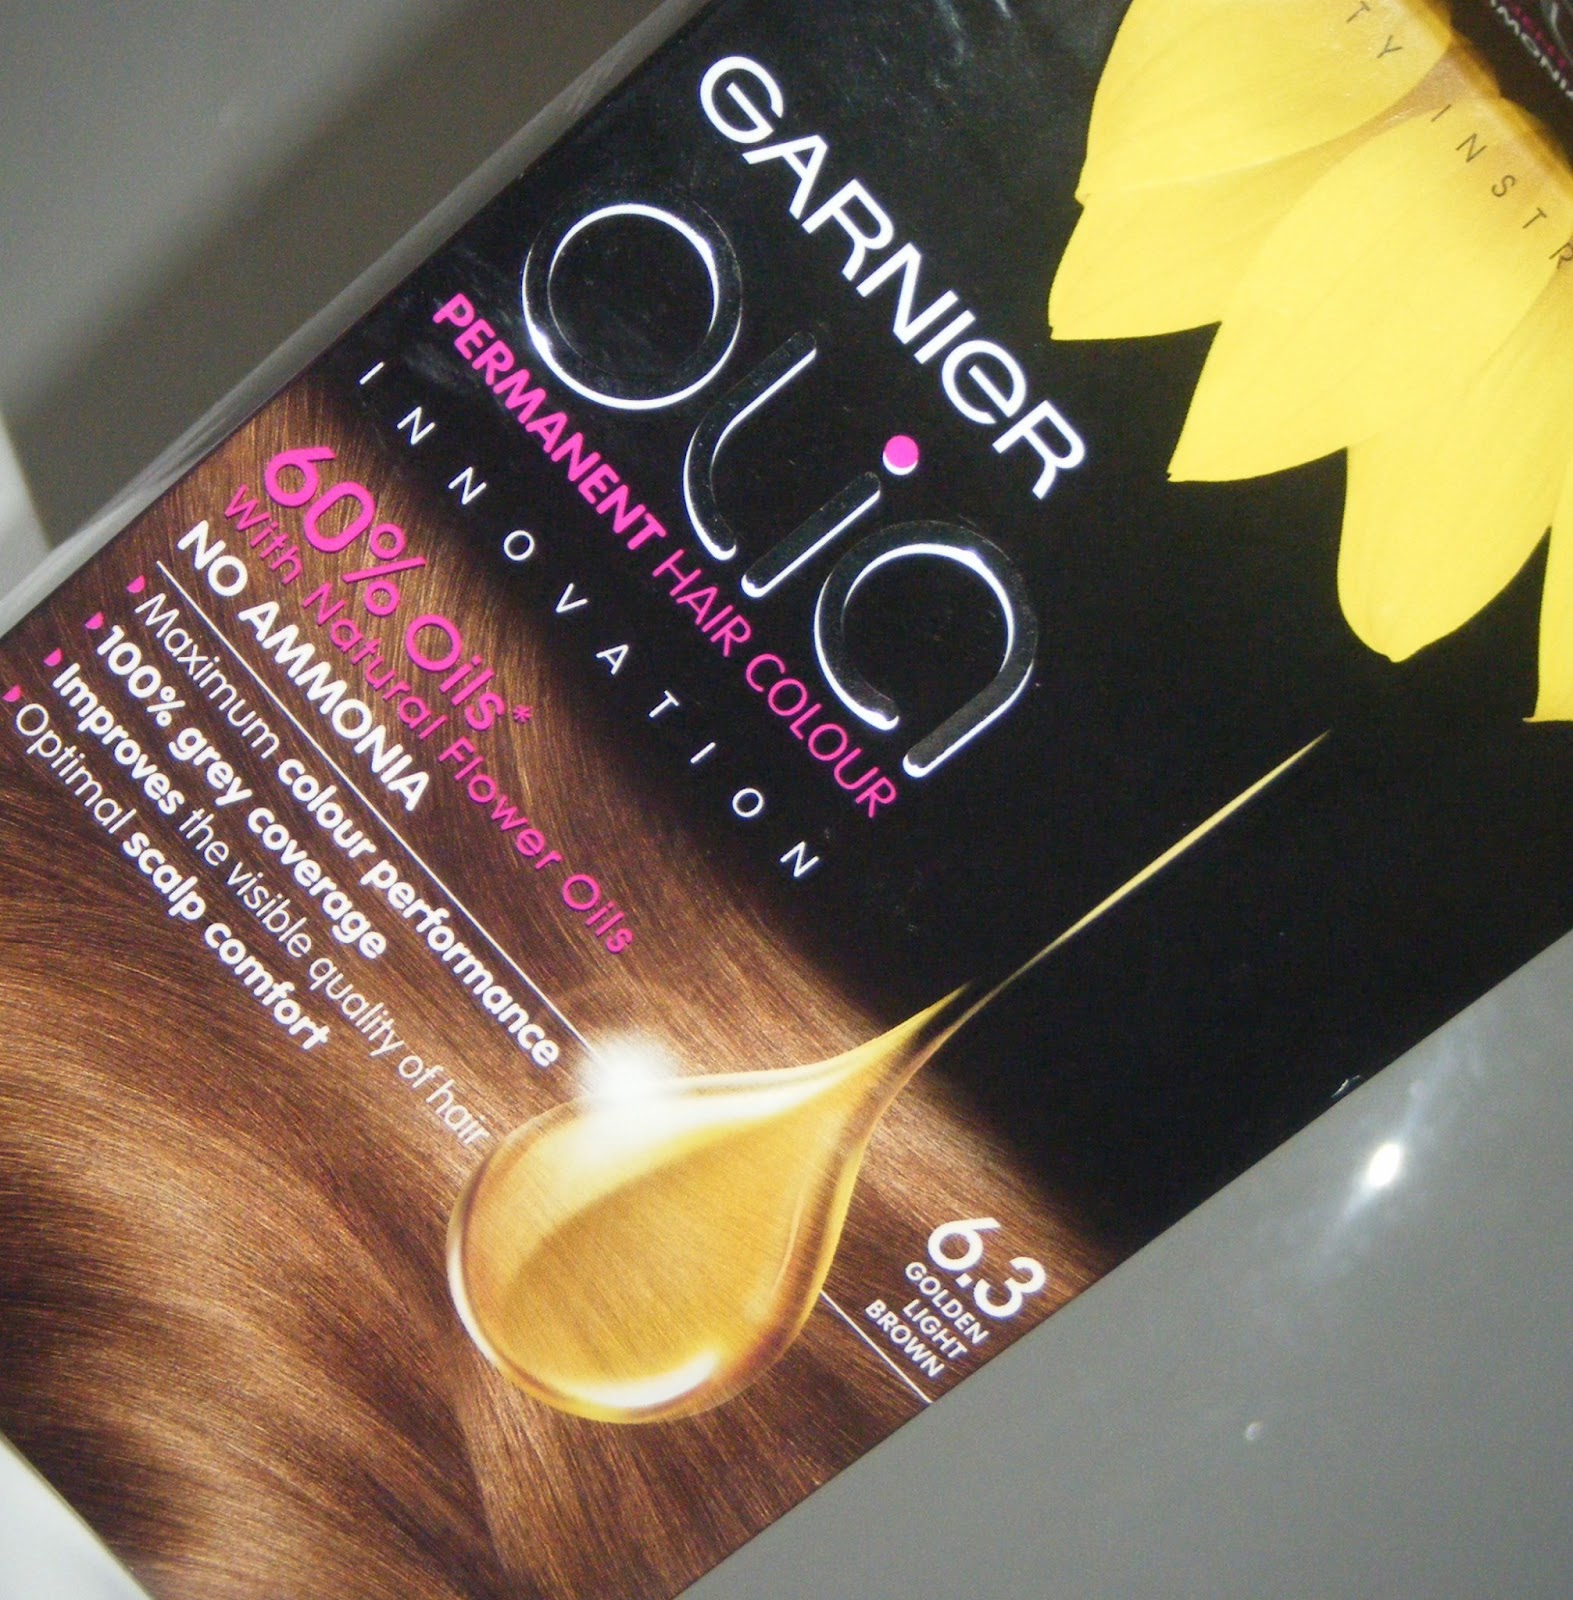 Olia Hair Colour in 6.3 Golden Light Brown Review.